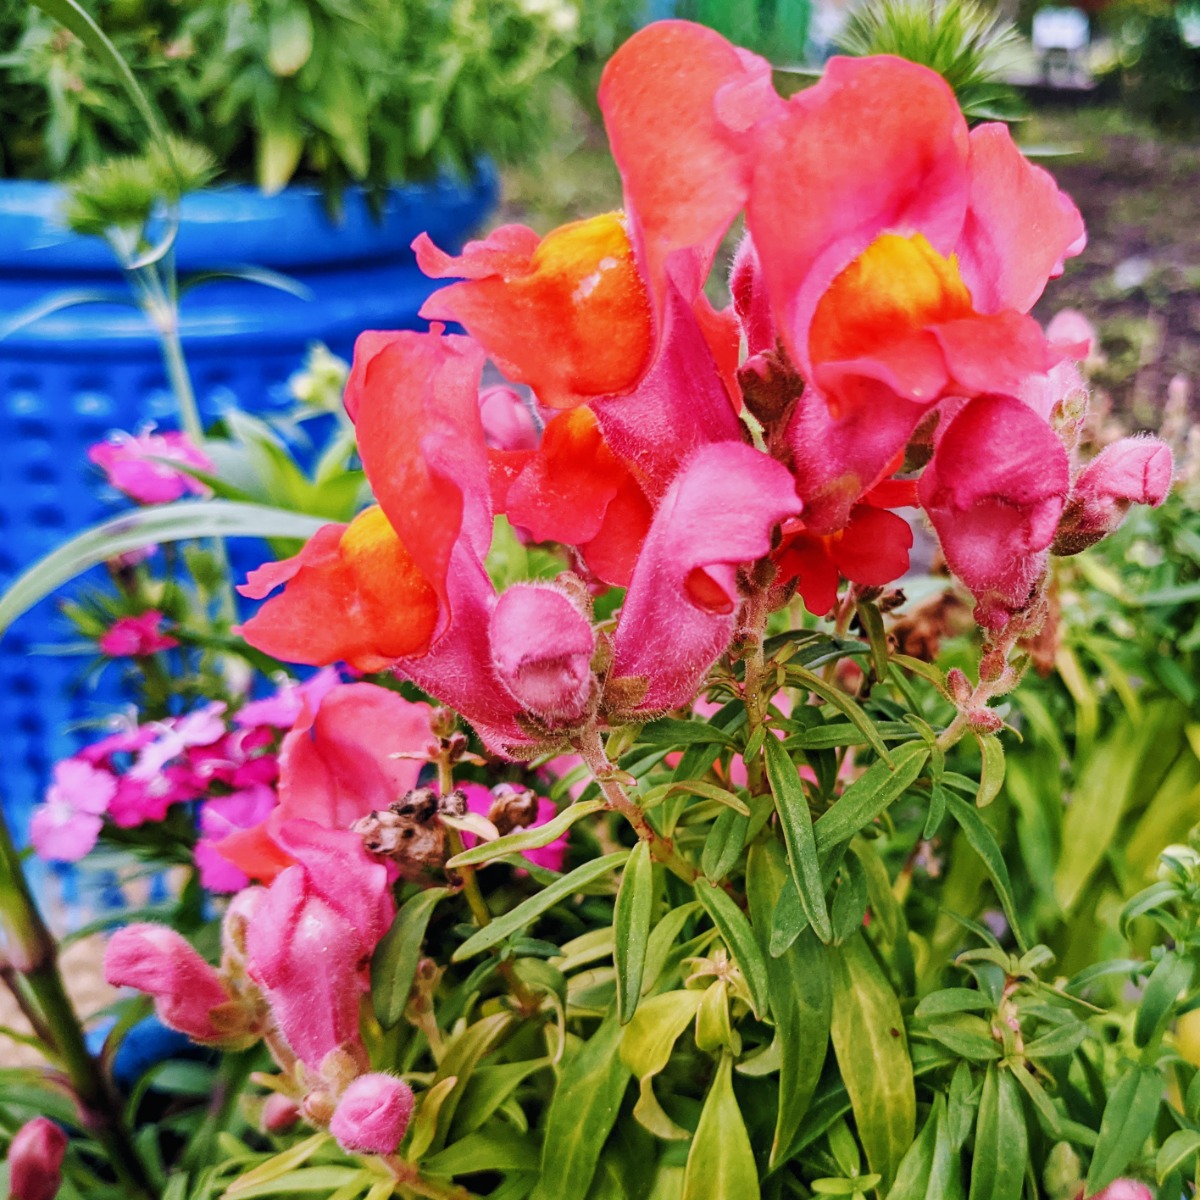 Pink and orange snapdragon with yellow - Learning how to deadhead snapdragons ensures even more prolific blooms of snapdragon flowers!